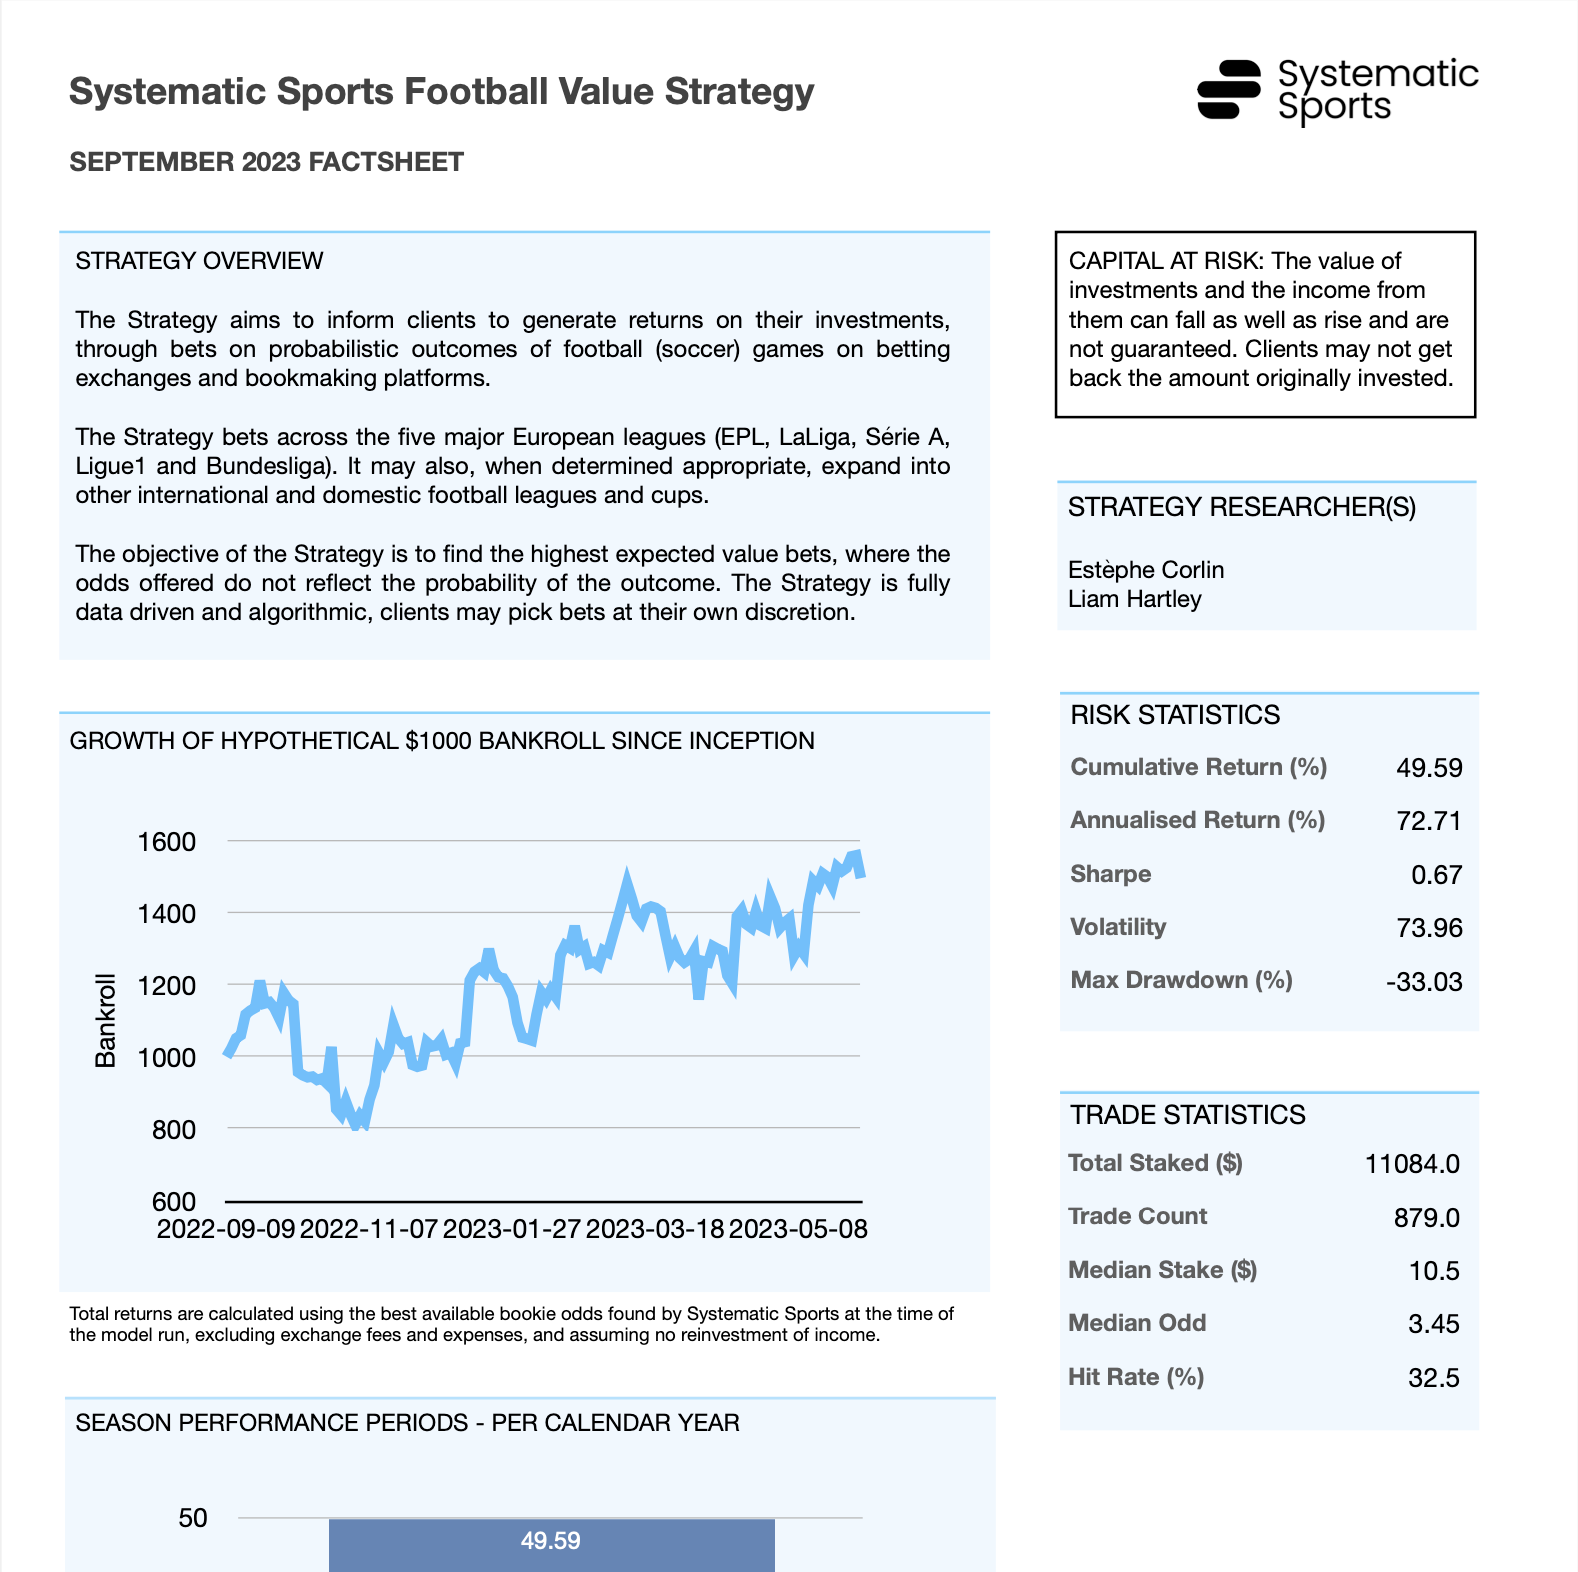 Value Betting Strategy Fact Sheet for Football gambling by Systematic Sports